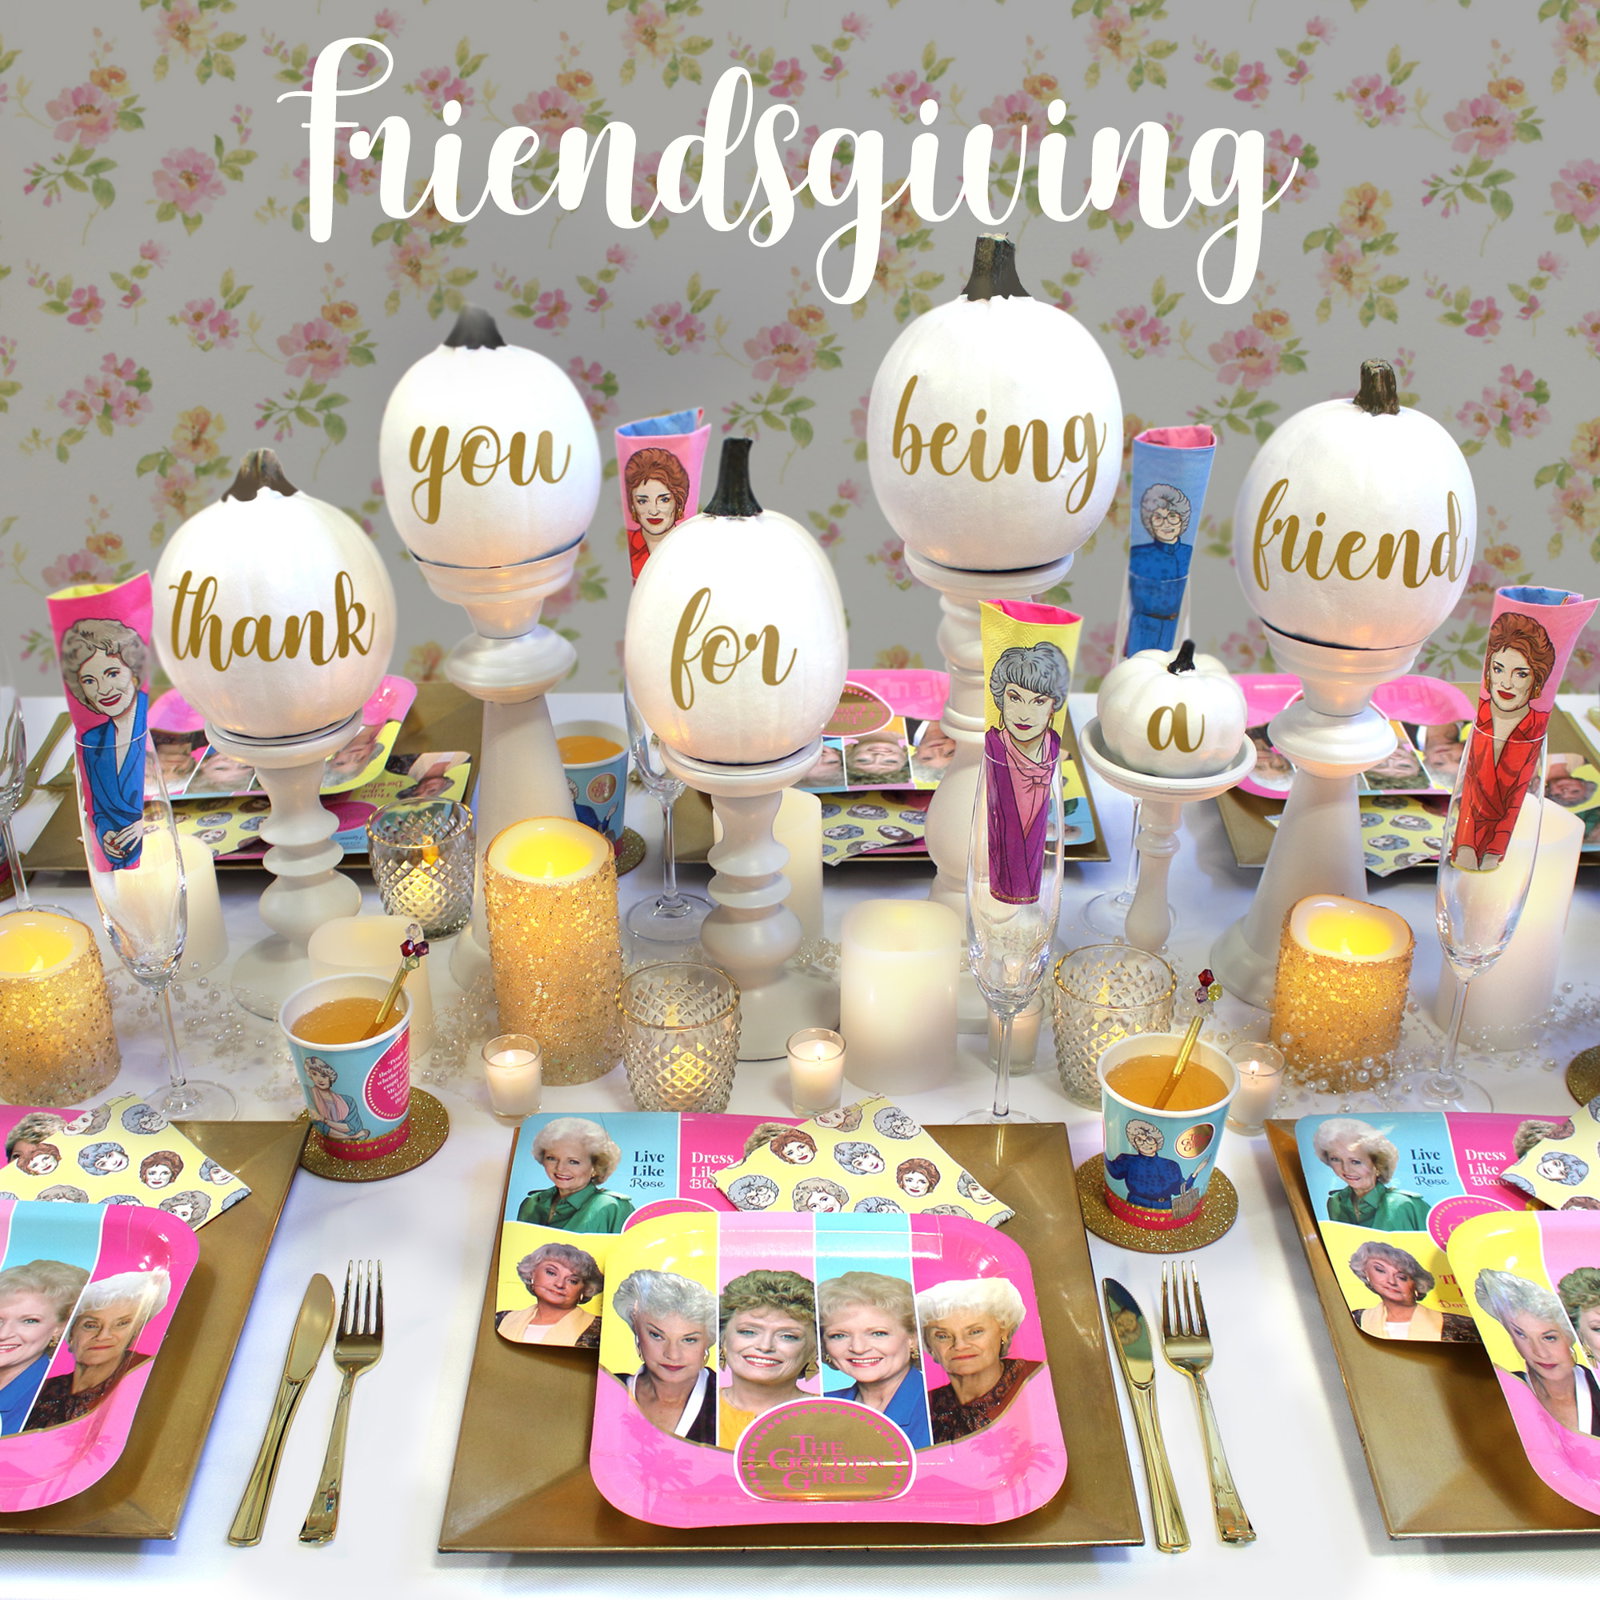 Prime Party Golden Girls Friendsgiving Party Save 10 Now Milled